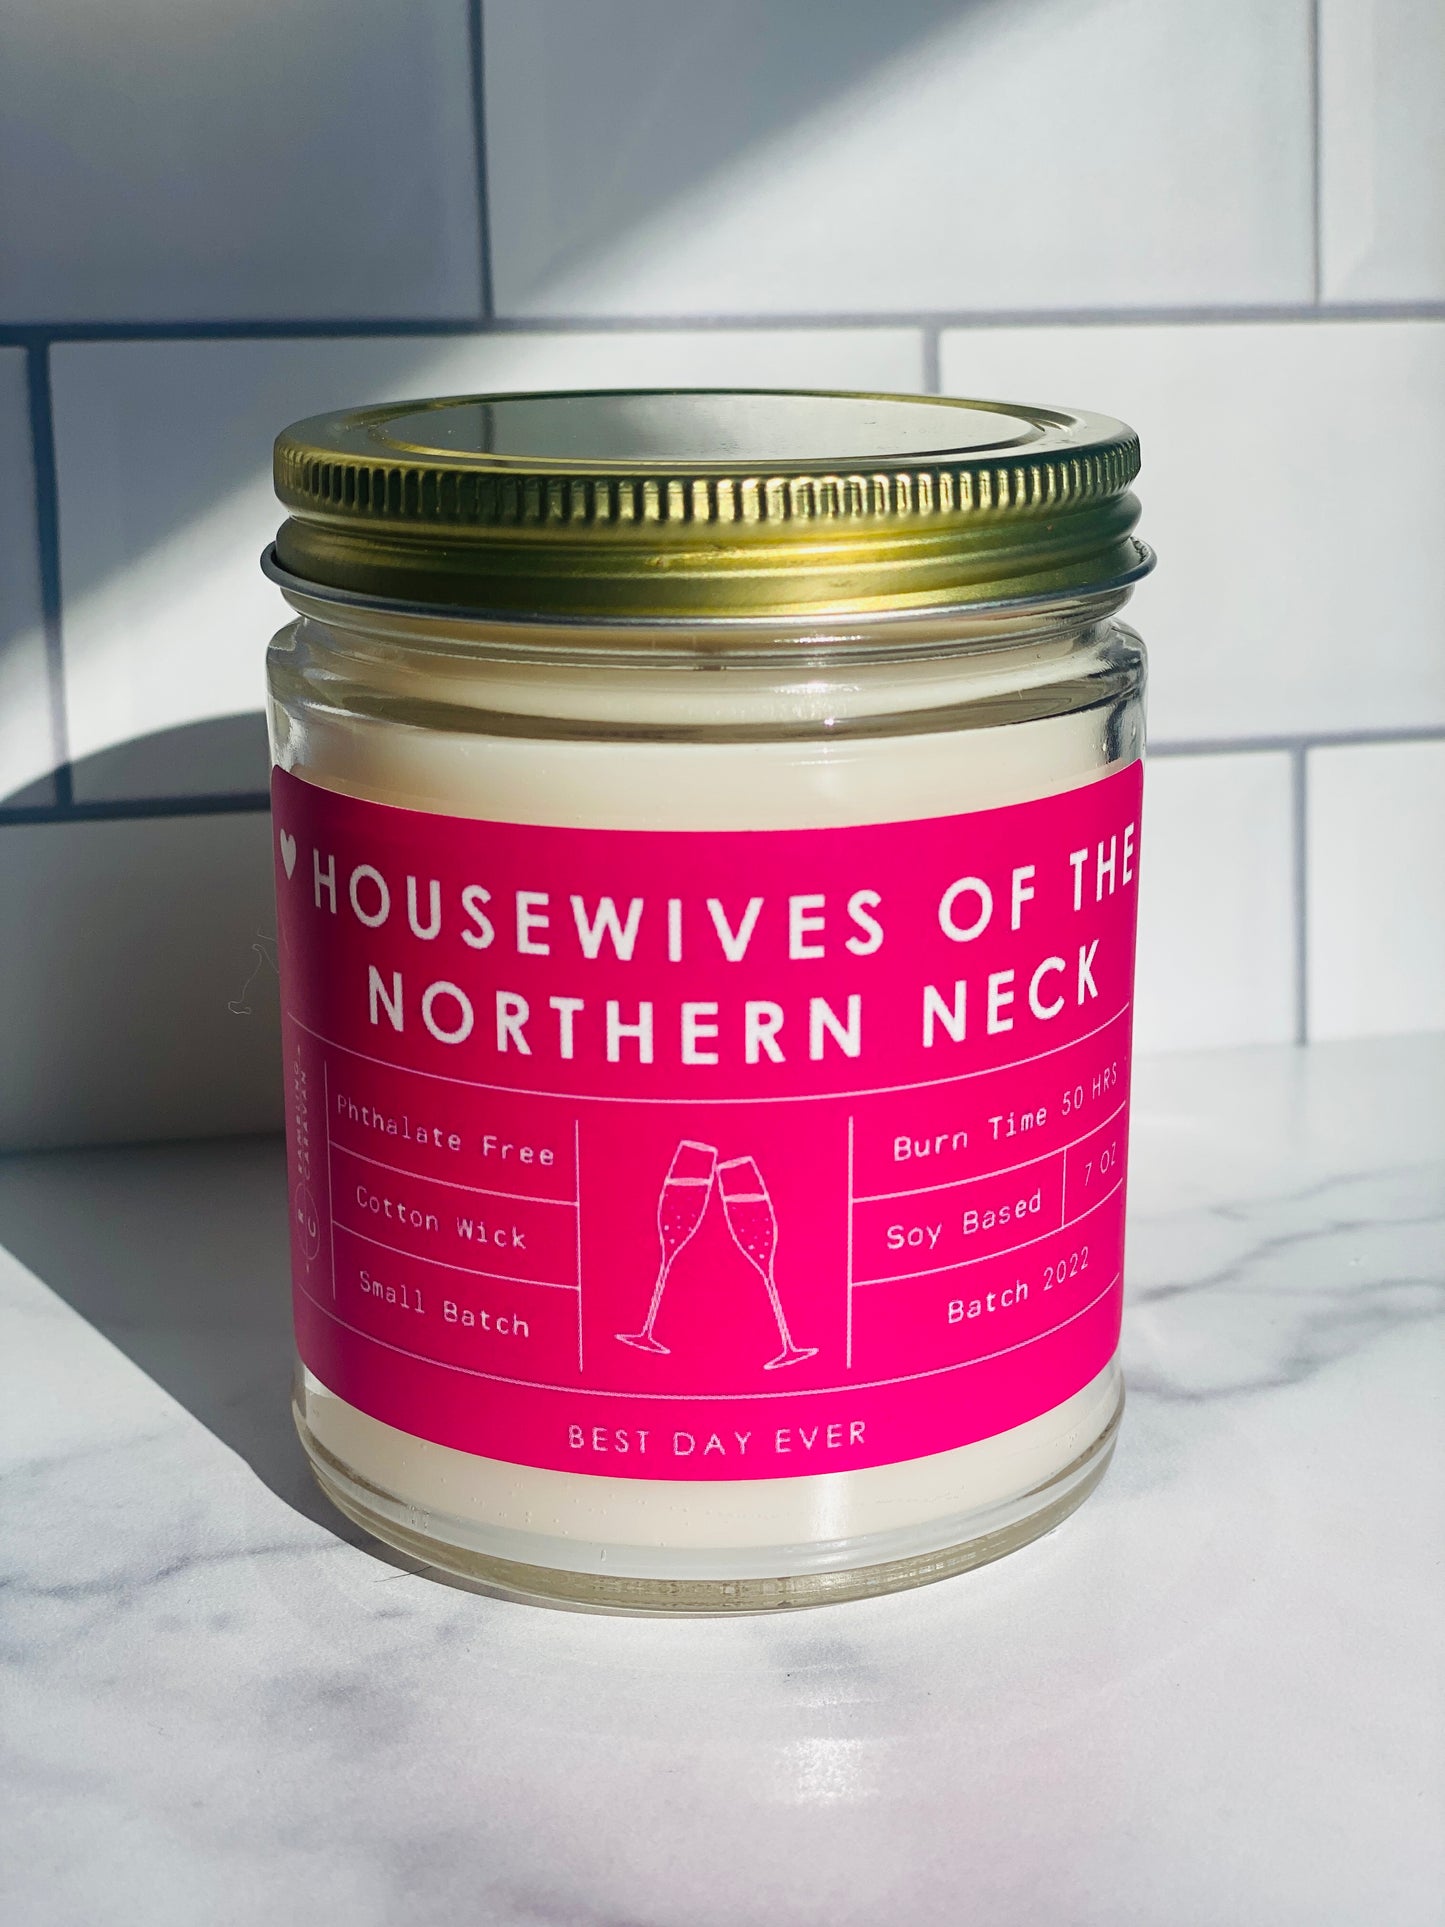 Housewives of the Northern Neck Candle